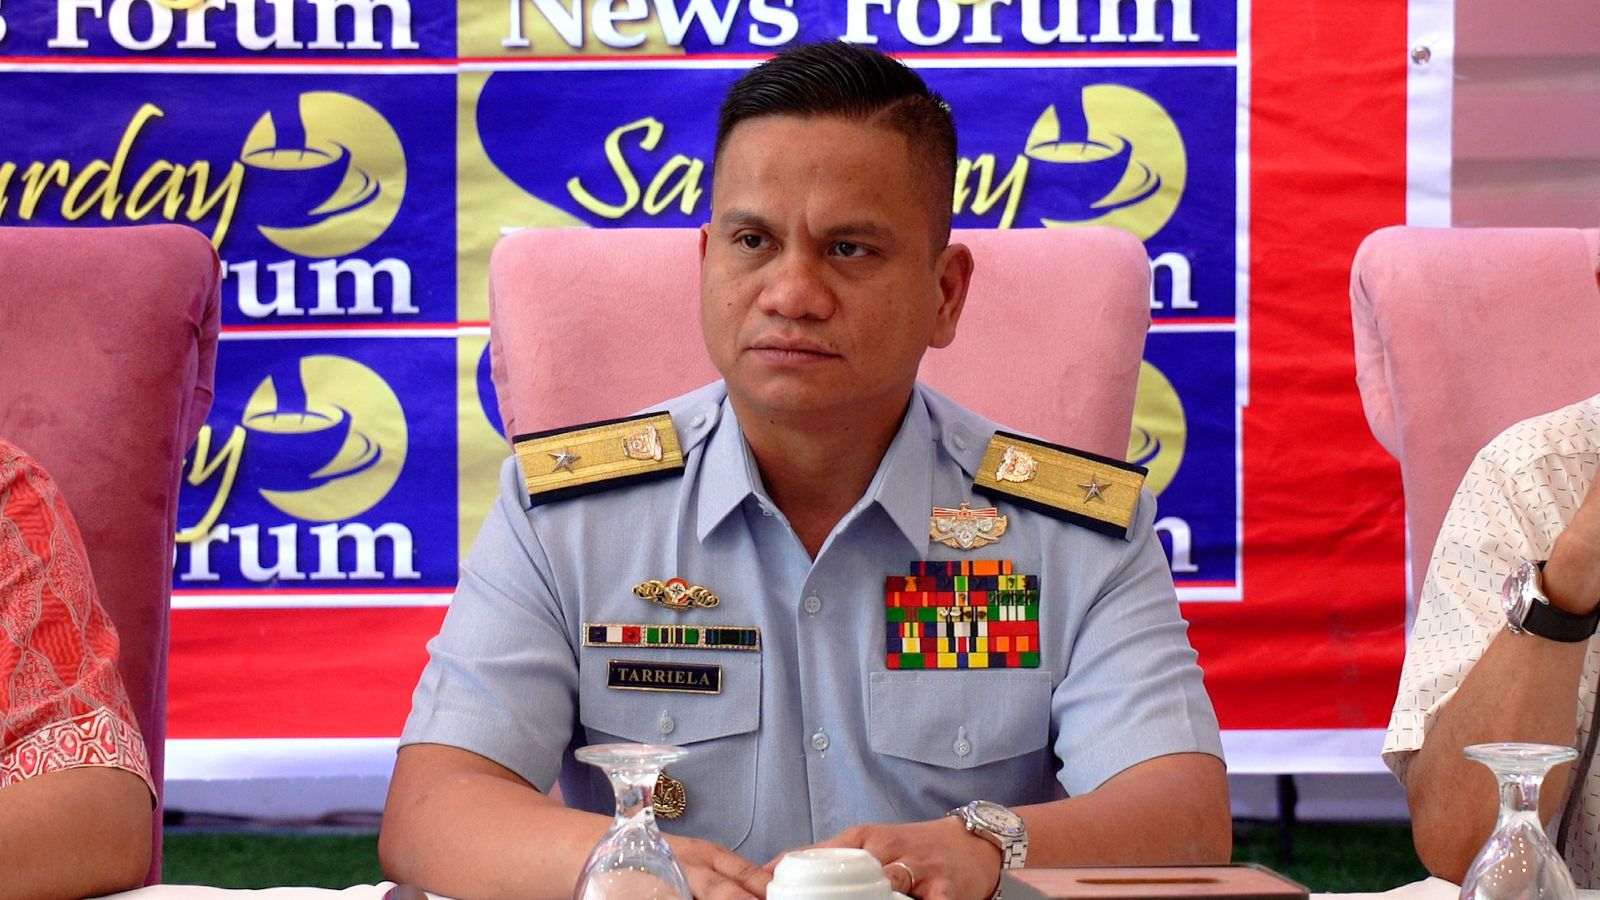 The Philippine Coast Guard (PCG) on Monday revealed Chinese fishermen’s illegal activities in Scarborough (Panatag) Shoal during the administration of former President Rodrigo Duterte.